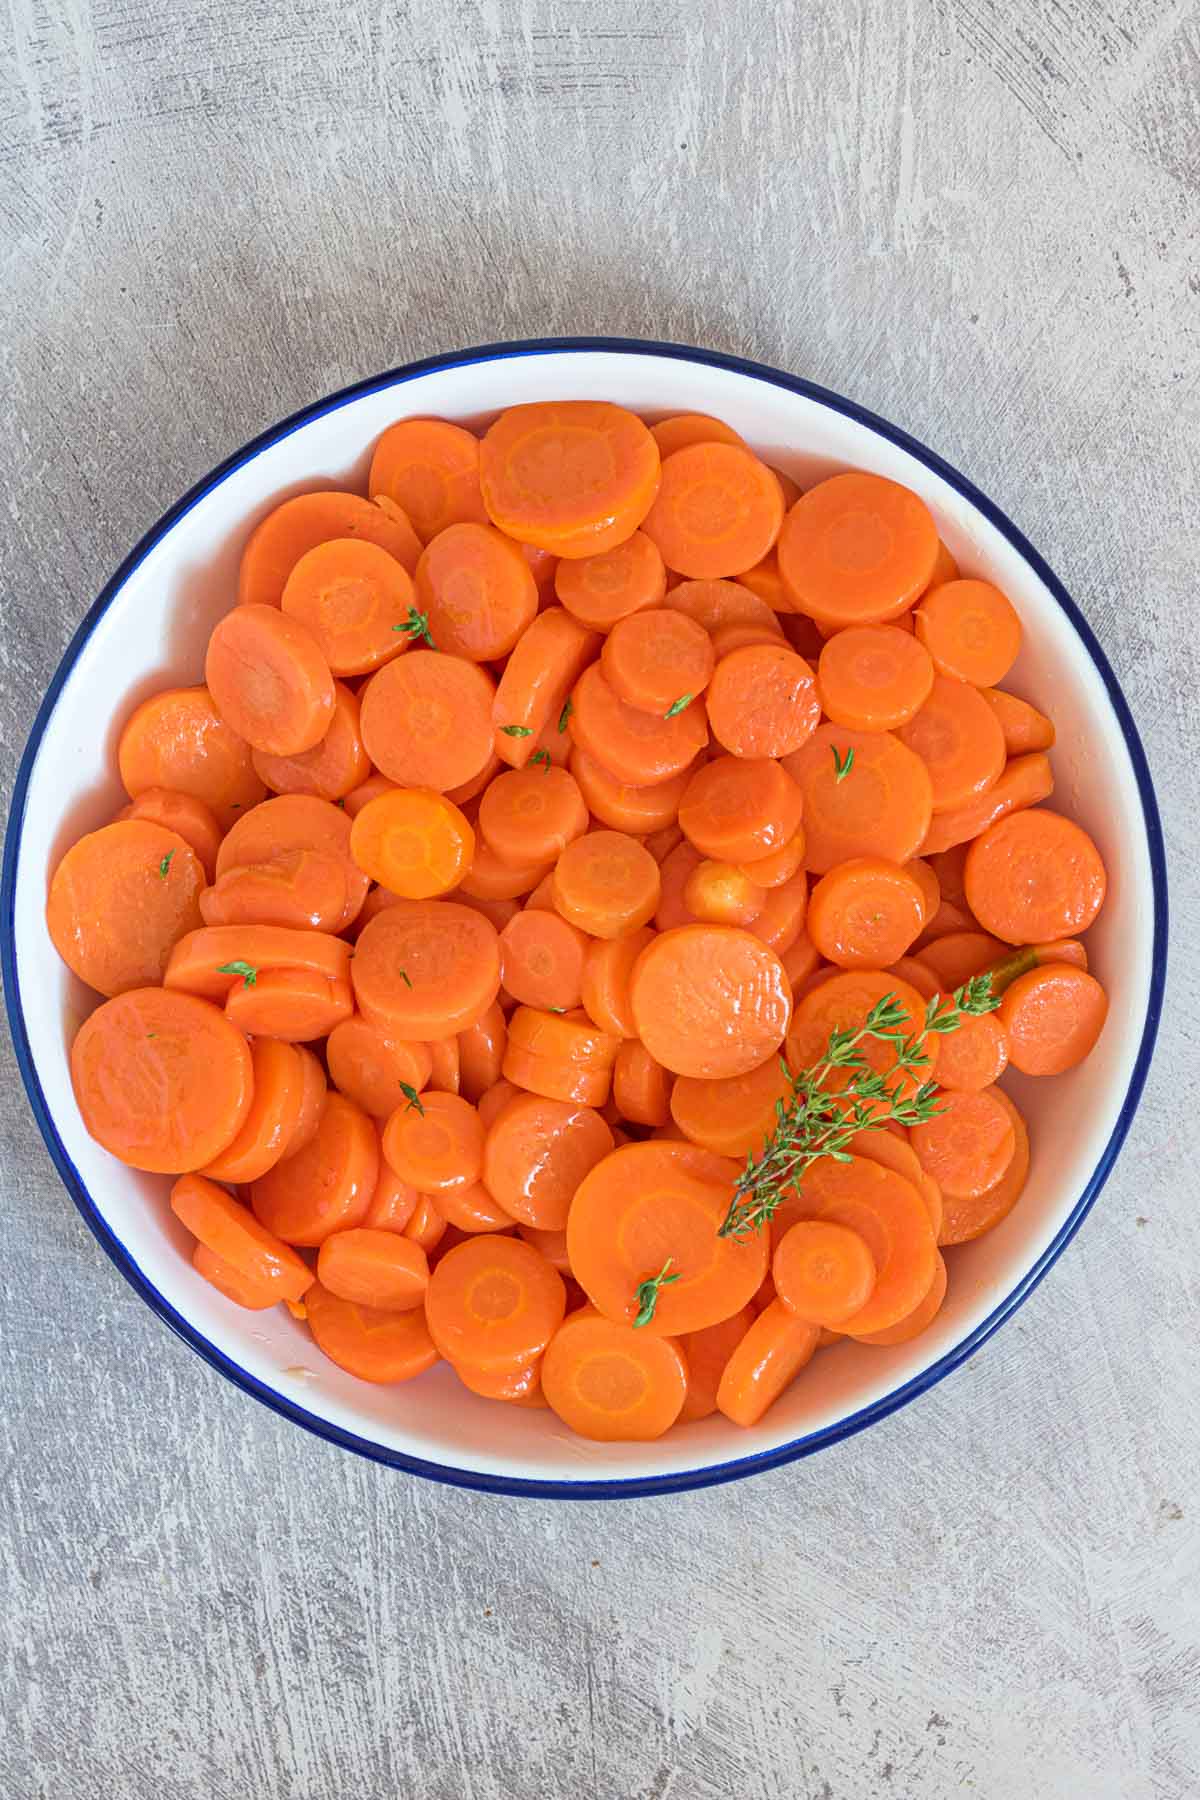 the cooked carrots in a serving bowl with fresh herb garnish